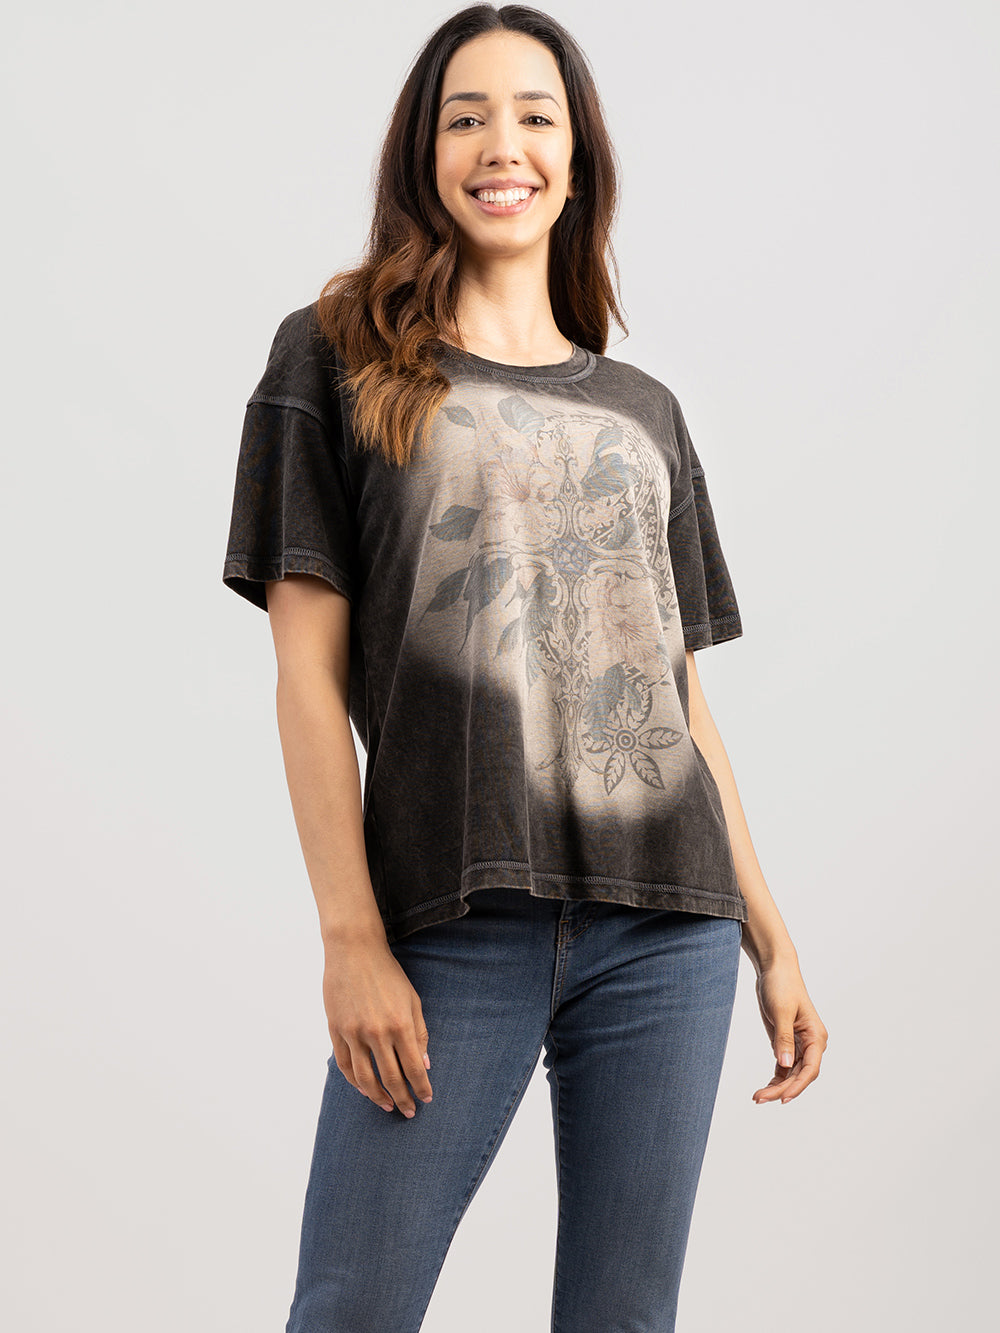 Delila Women's Washed Floral Cross Tee - Montana West World